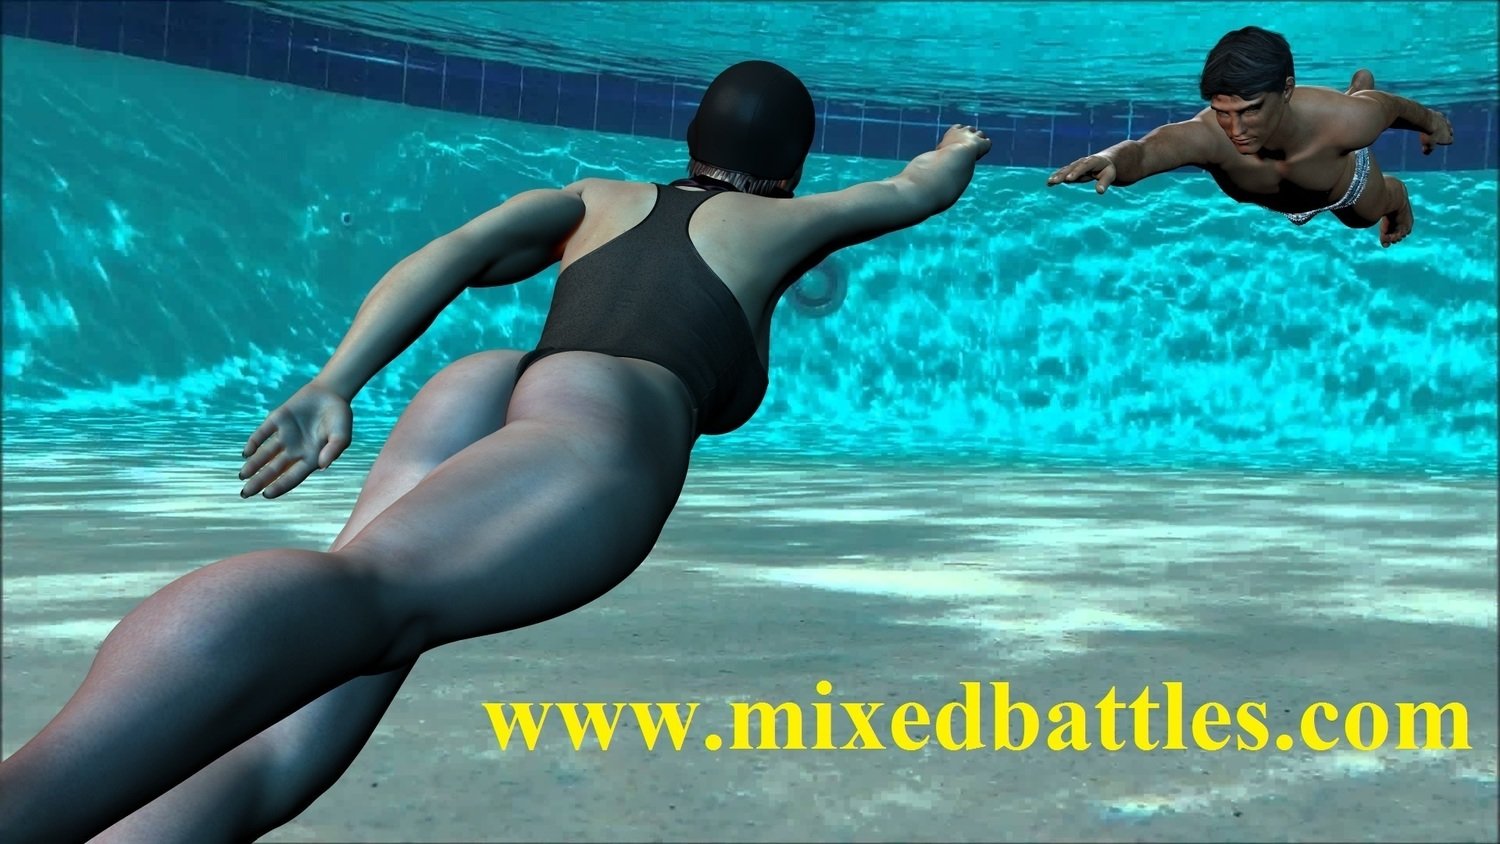 underwater mixed wrestling one piece bathing suit female domination fight